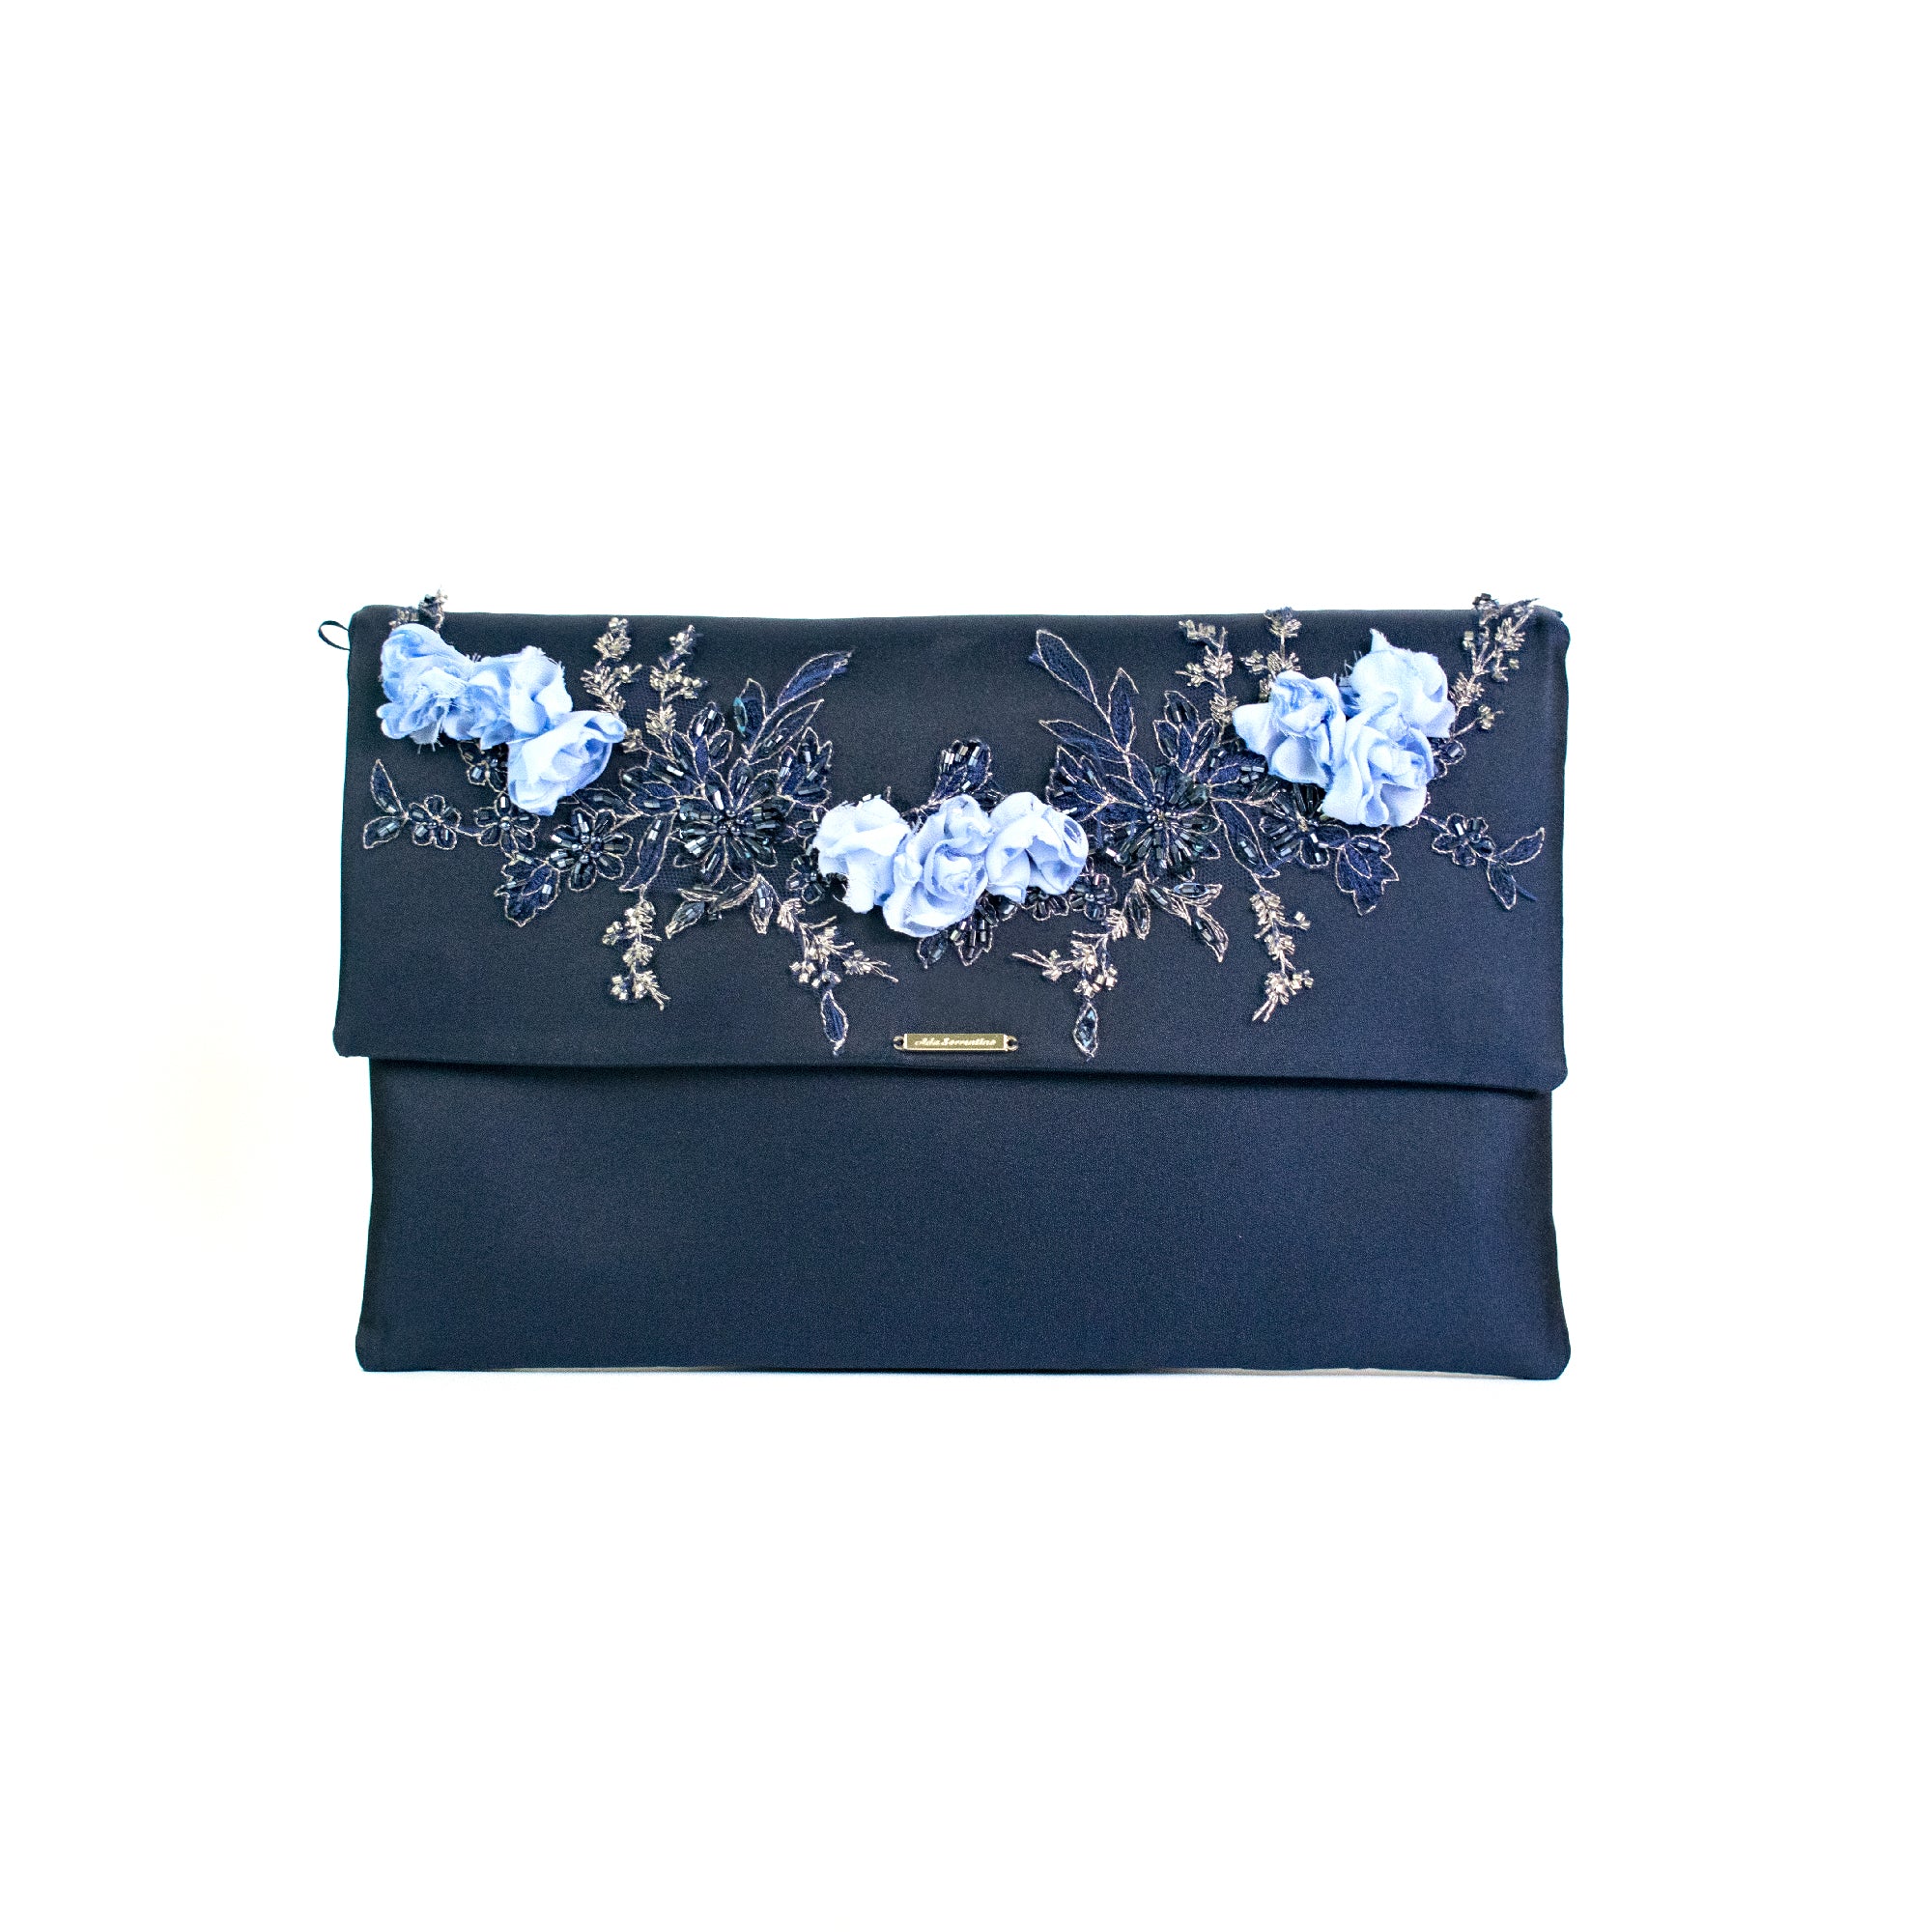 Blue clutch bag with three-dimensional flowers